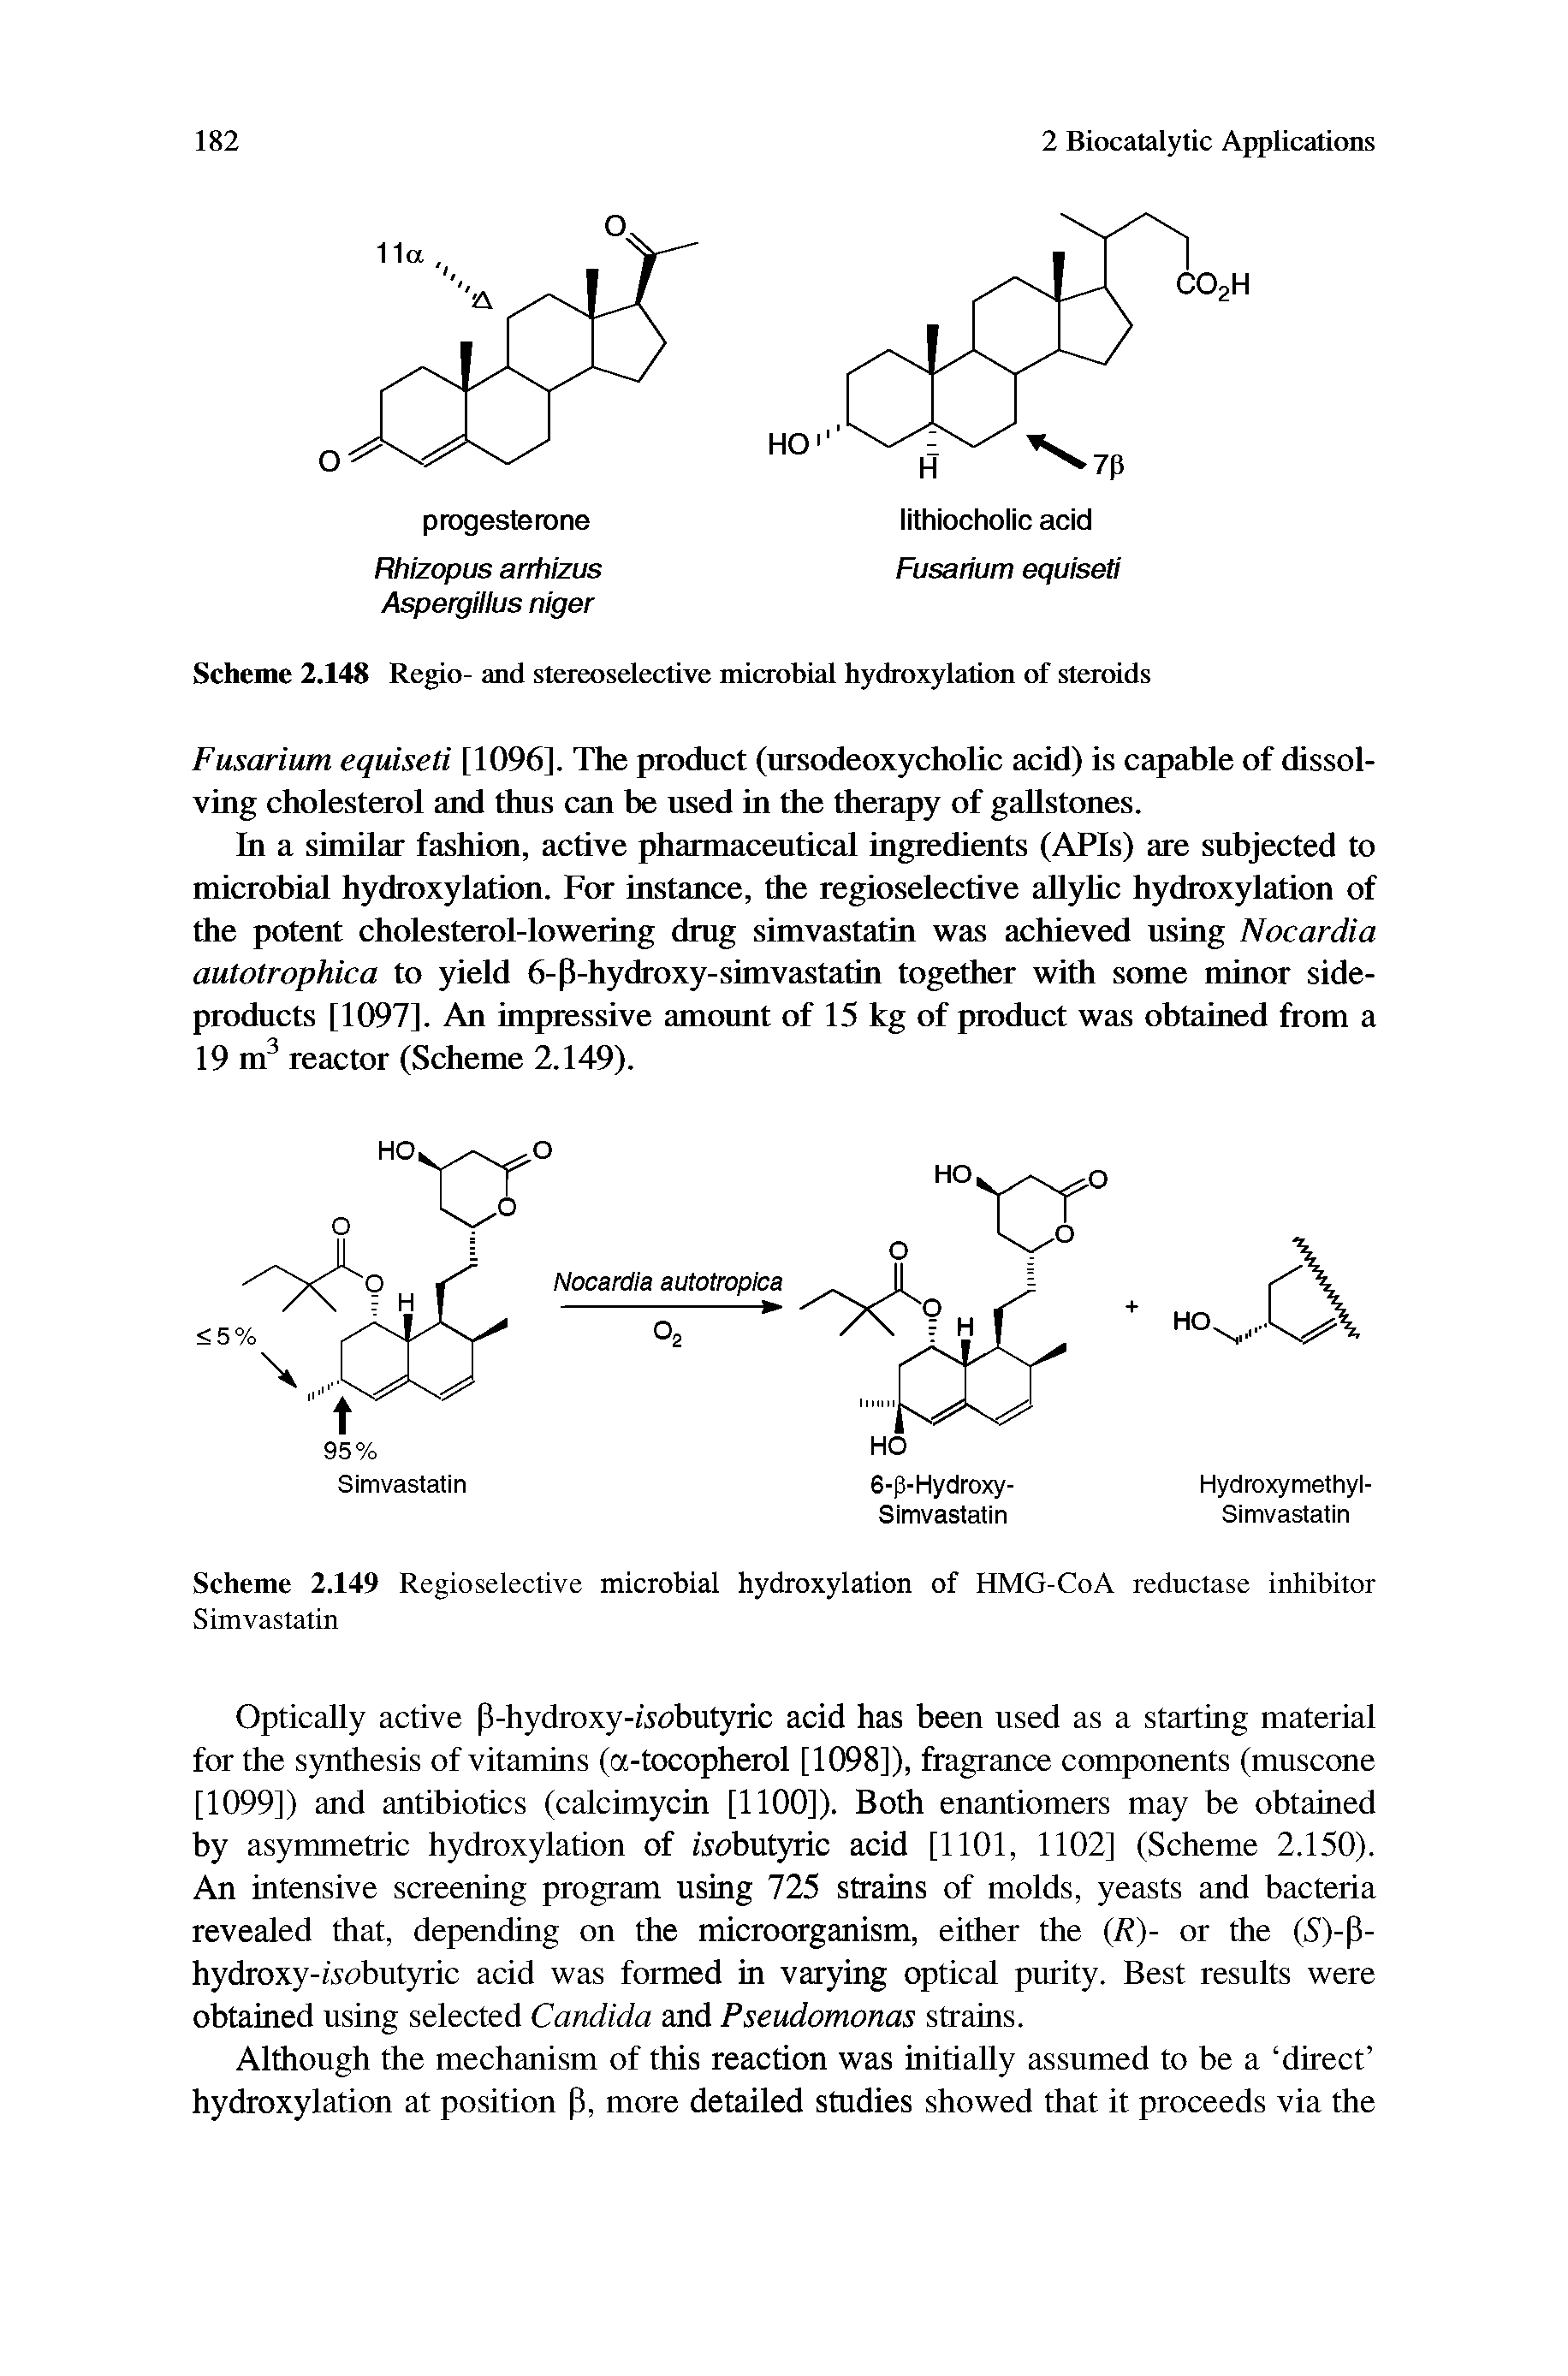 Scheme 2.148 Regio- and stereoselective microbial hydroxylation of steroids...